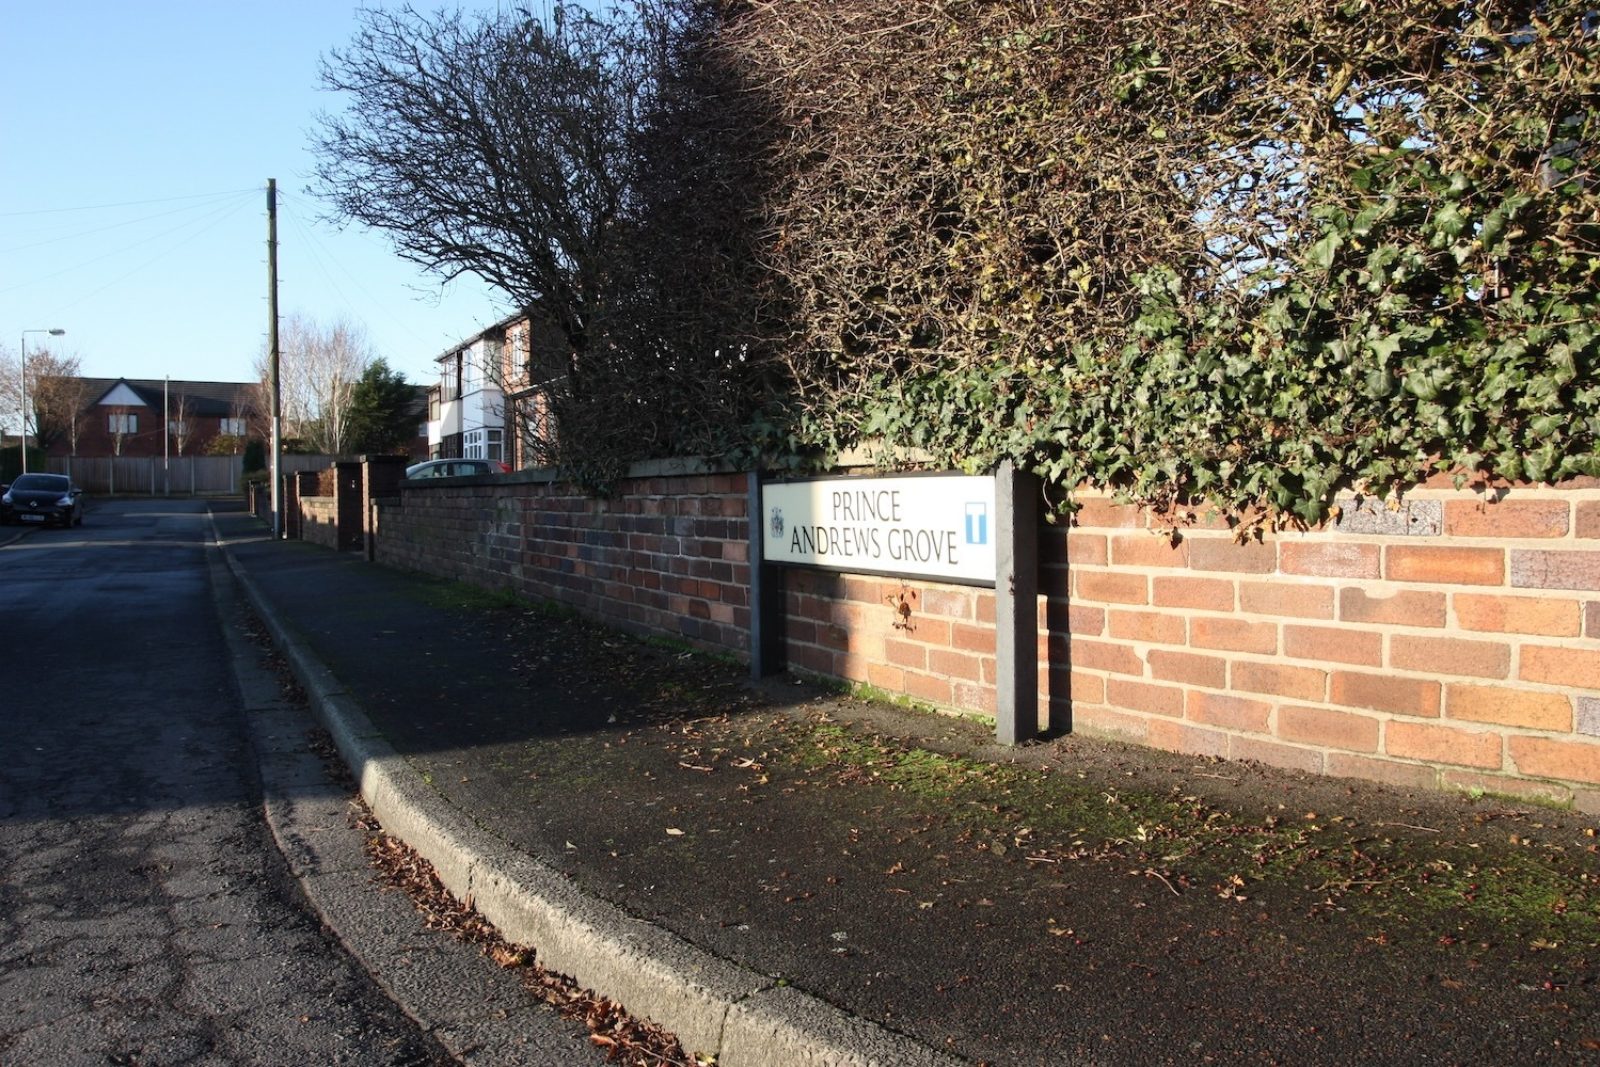 Photograph of street sign reading Prince Andrews Grove, it is in front of a short red brick wall with a hedge growing behind it in a suburban area, it is a sunny day.